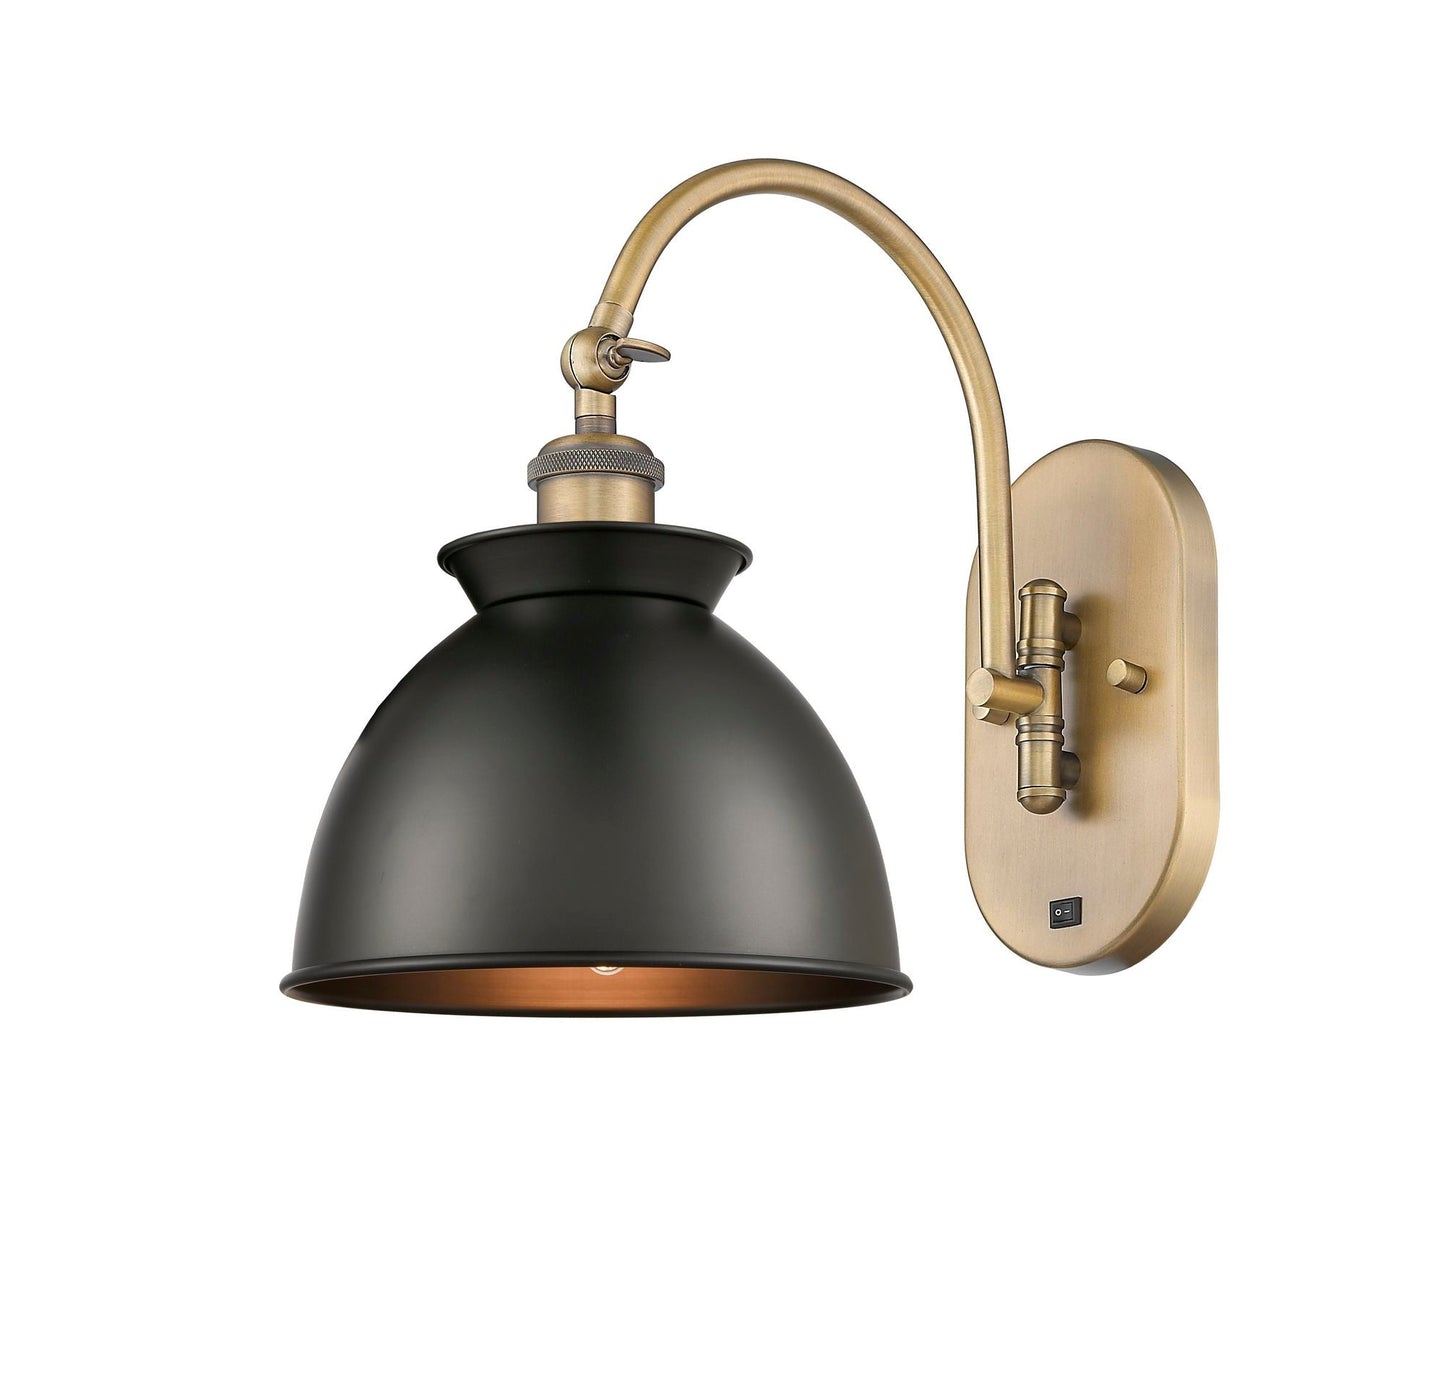 518-1W-BB-M14-BK 1-Light 8.125" Brushed Brass Sconce - Matte Black Adirondack Shade - LED Bulb - Dimmensions: 8.125 x 14.125 x 12.25 - Glass Up or Down: Yes